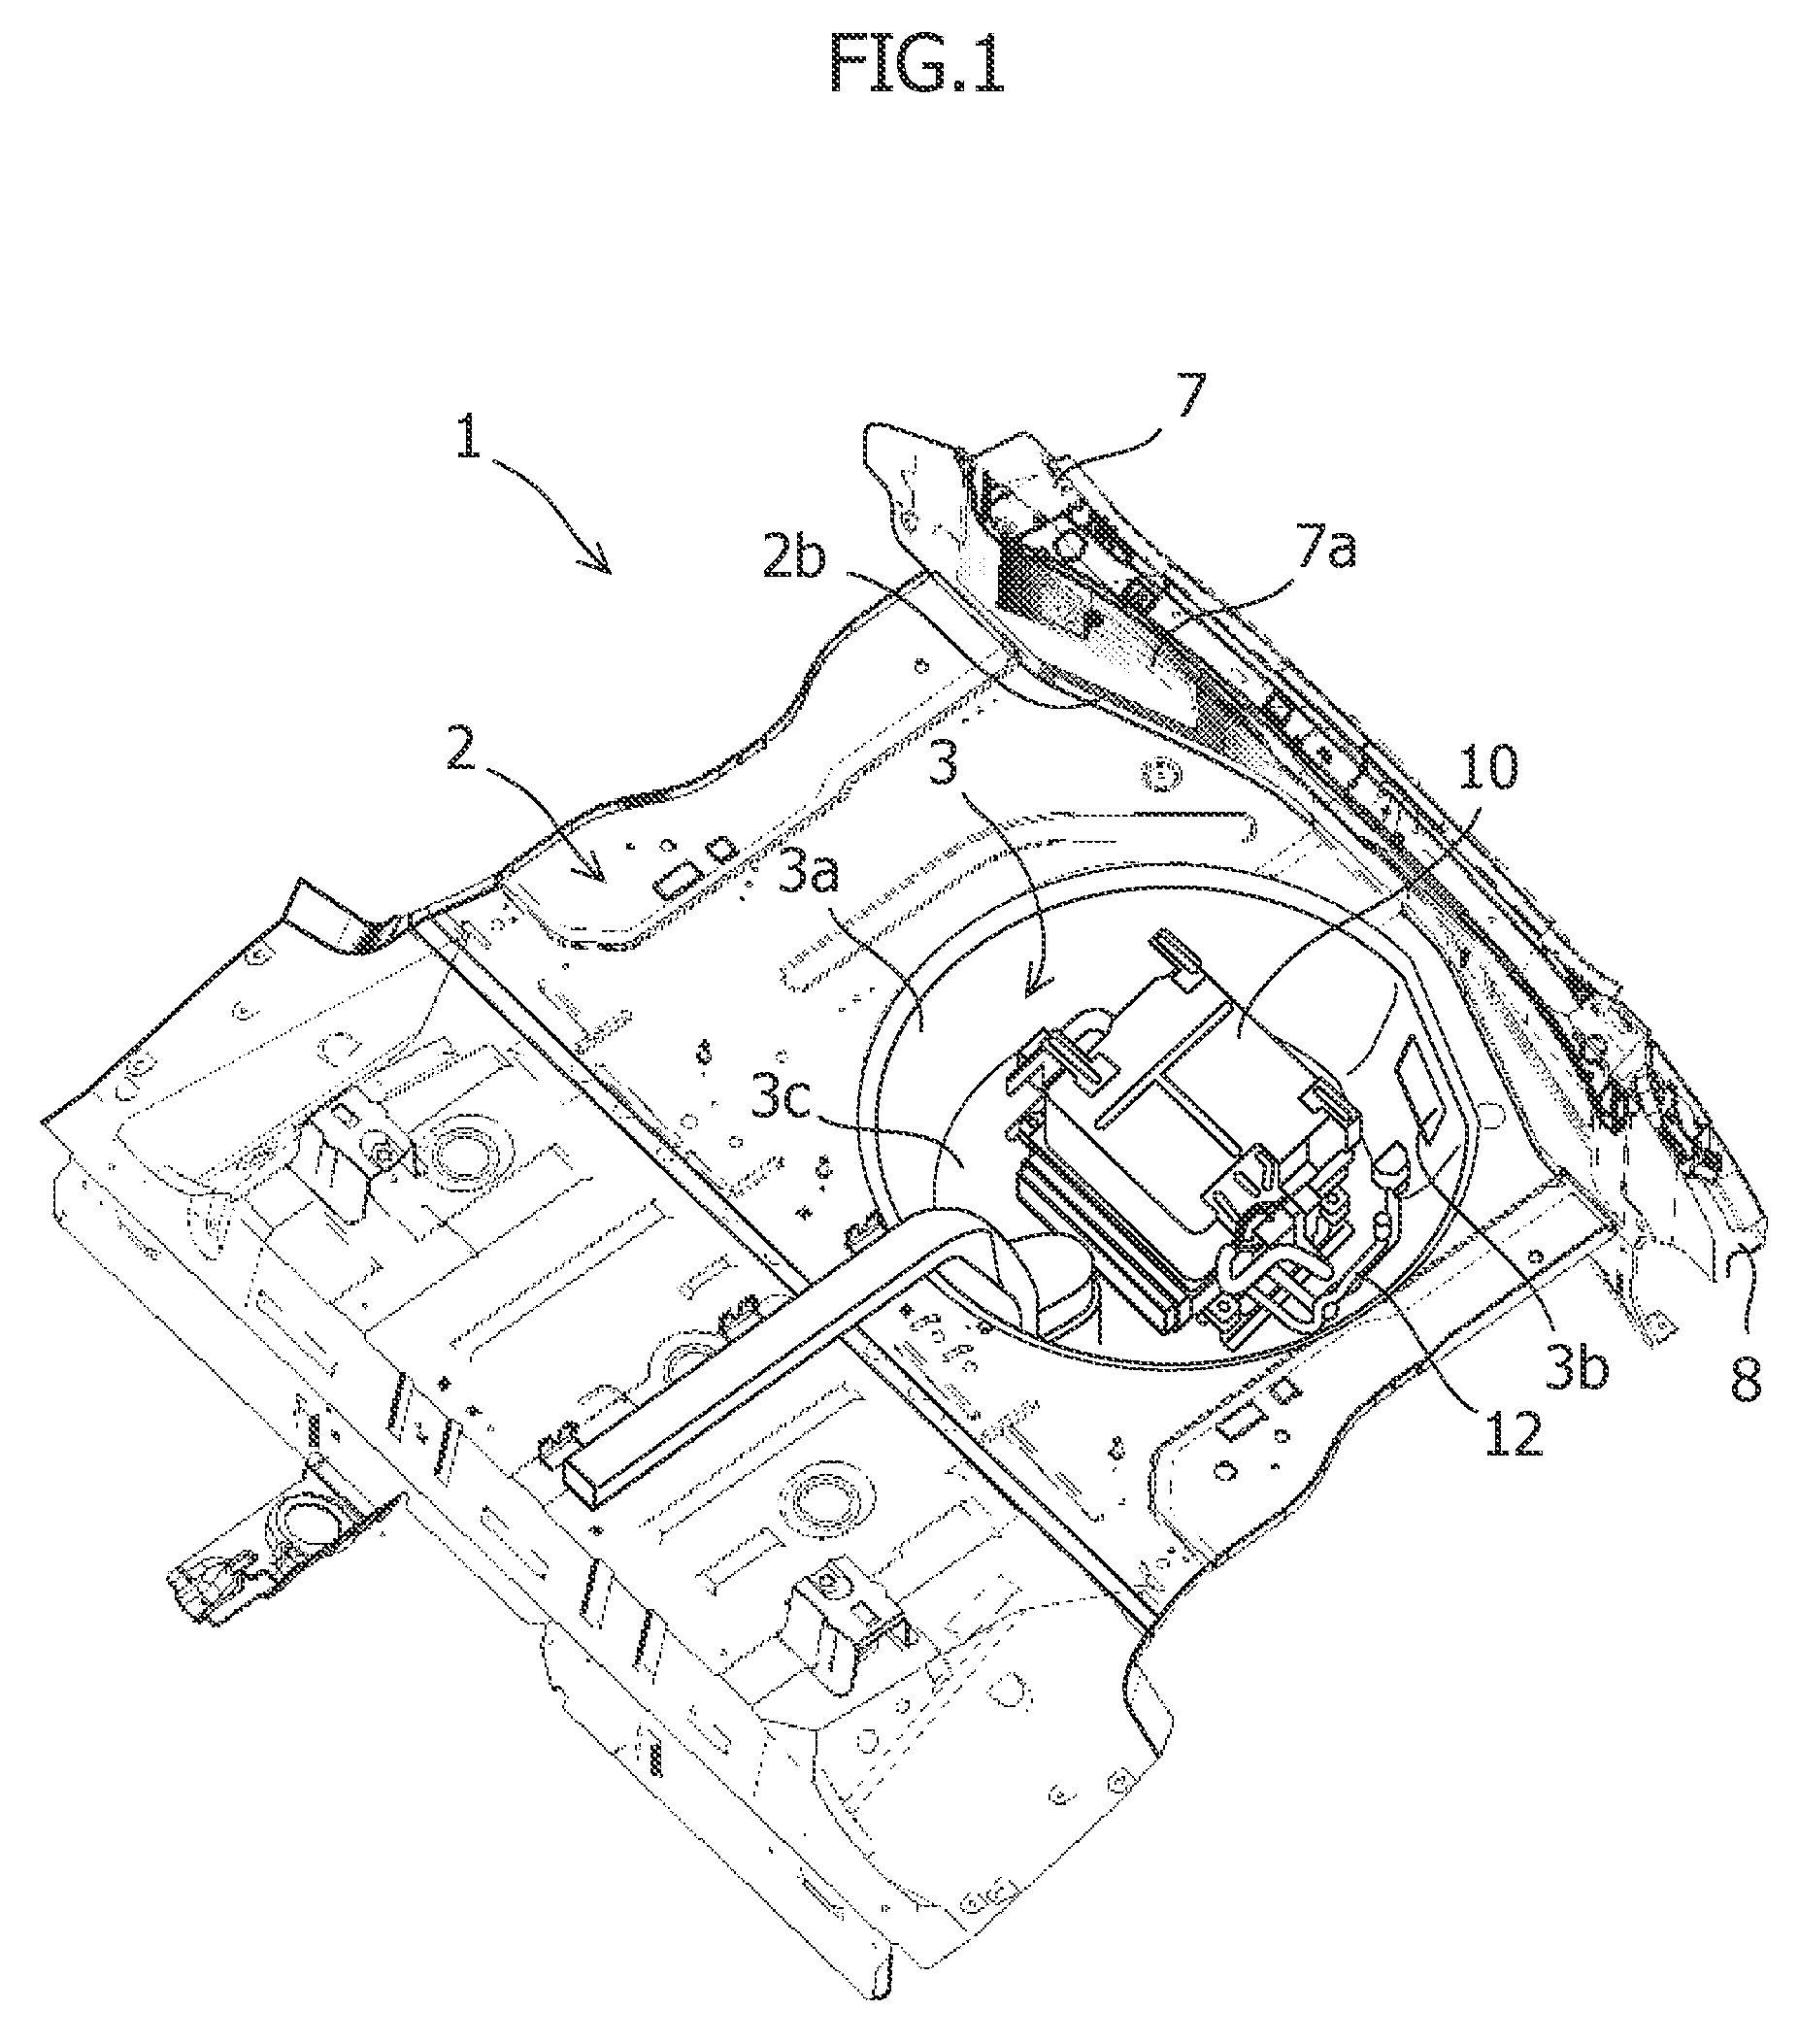 Installation structure for charging equipment in rear vehicle body